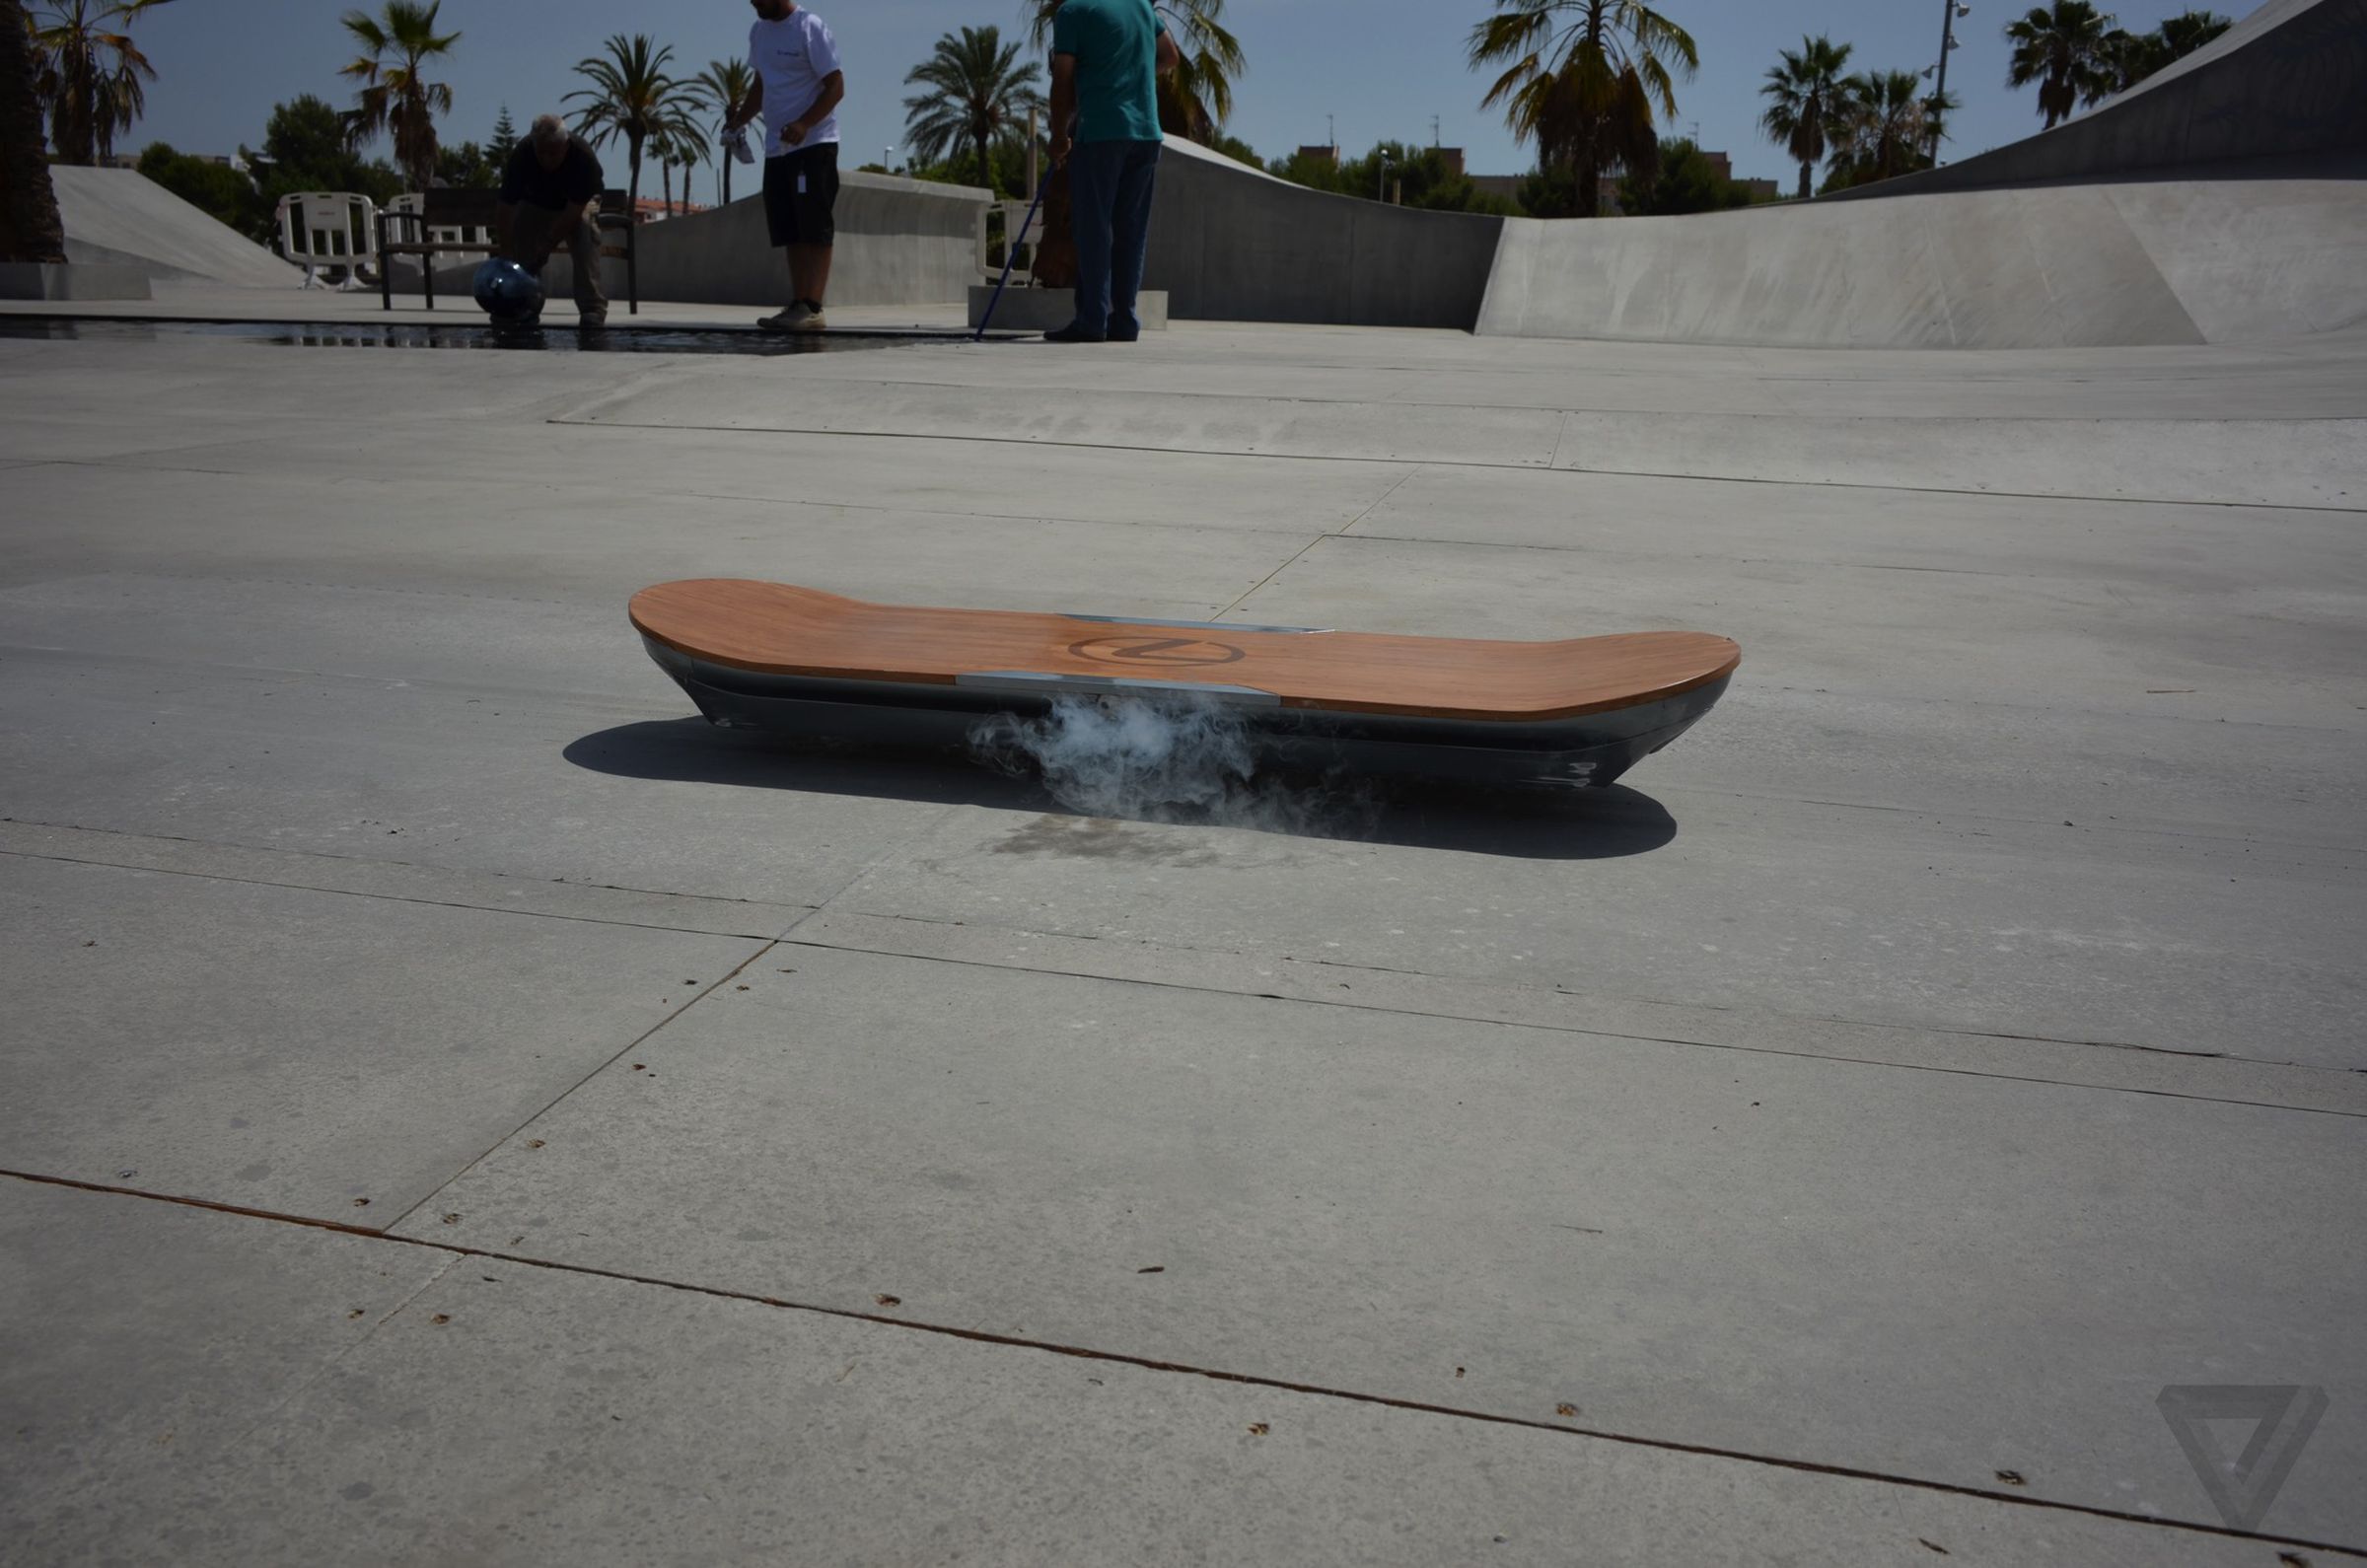 Lexus hoverboard and hoverpark pictures